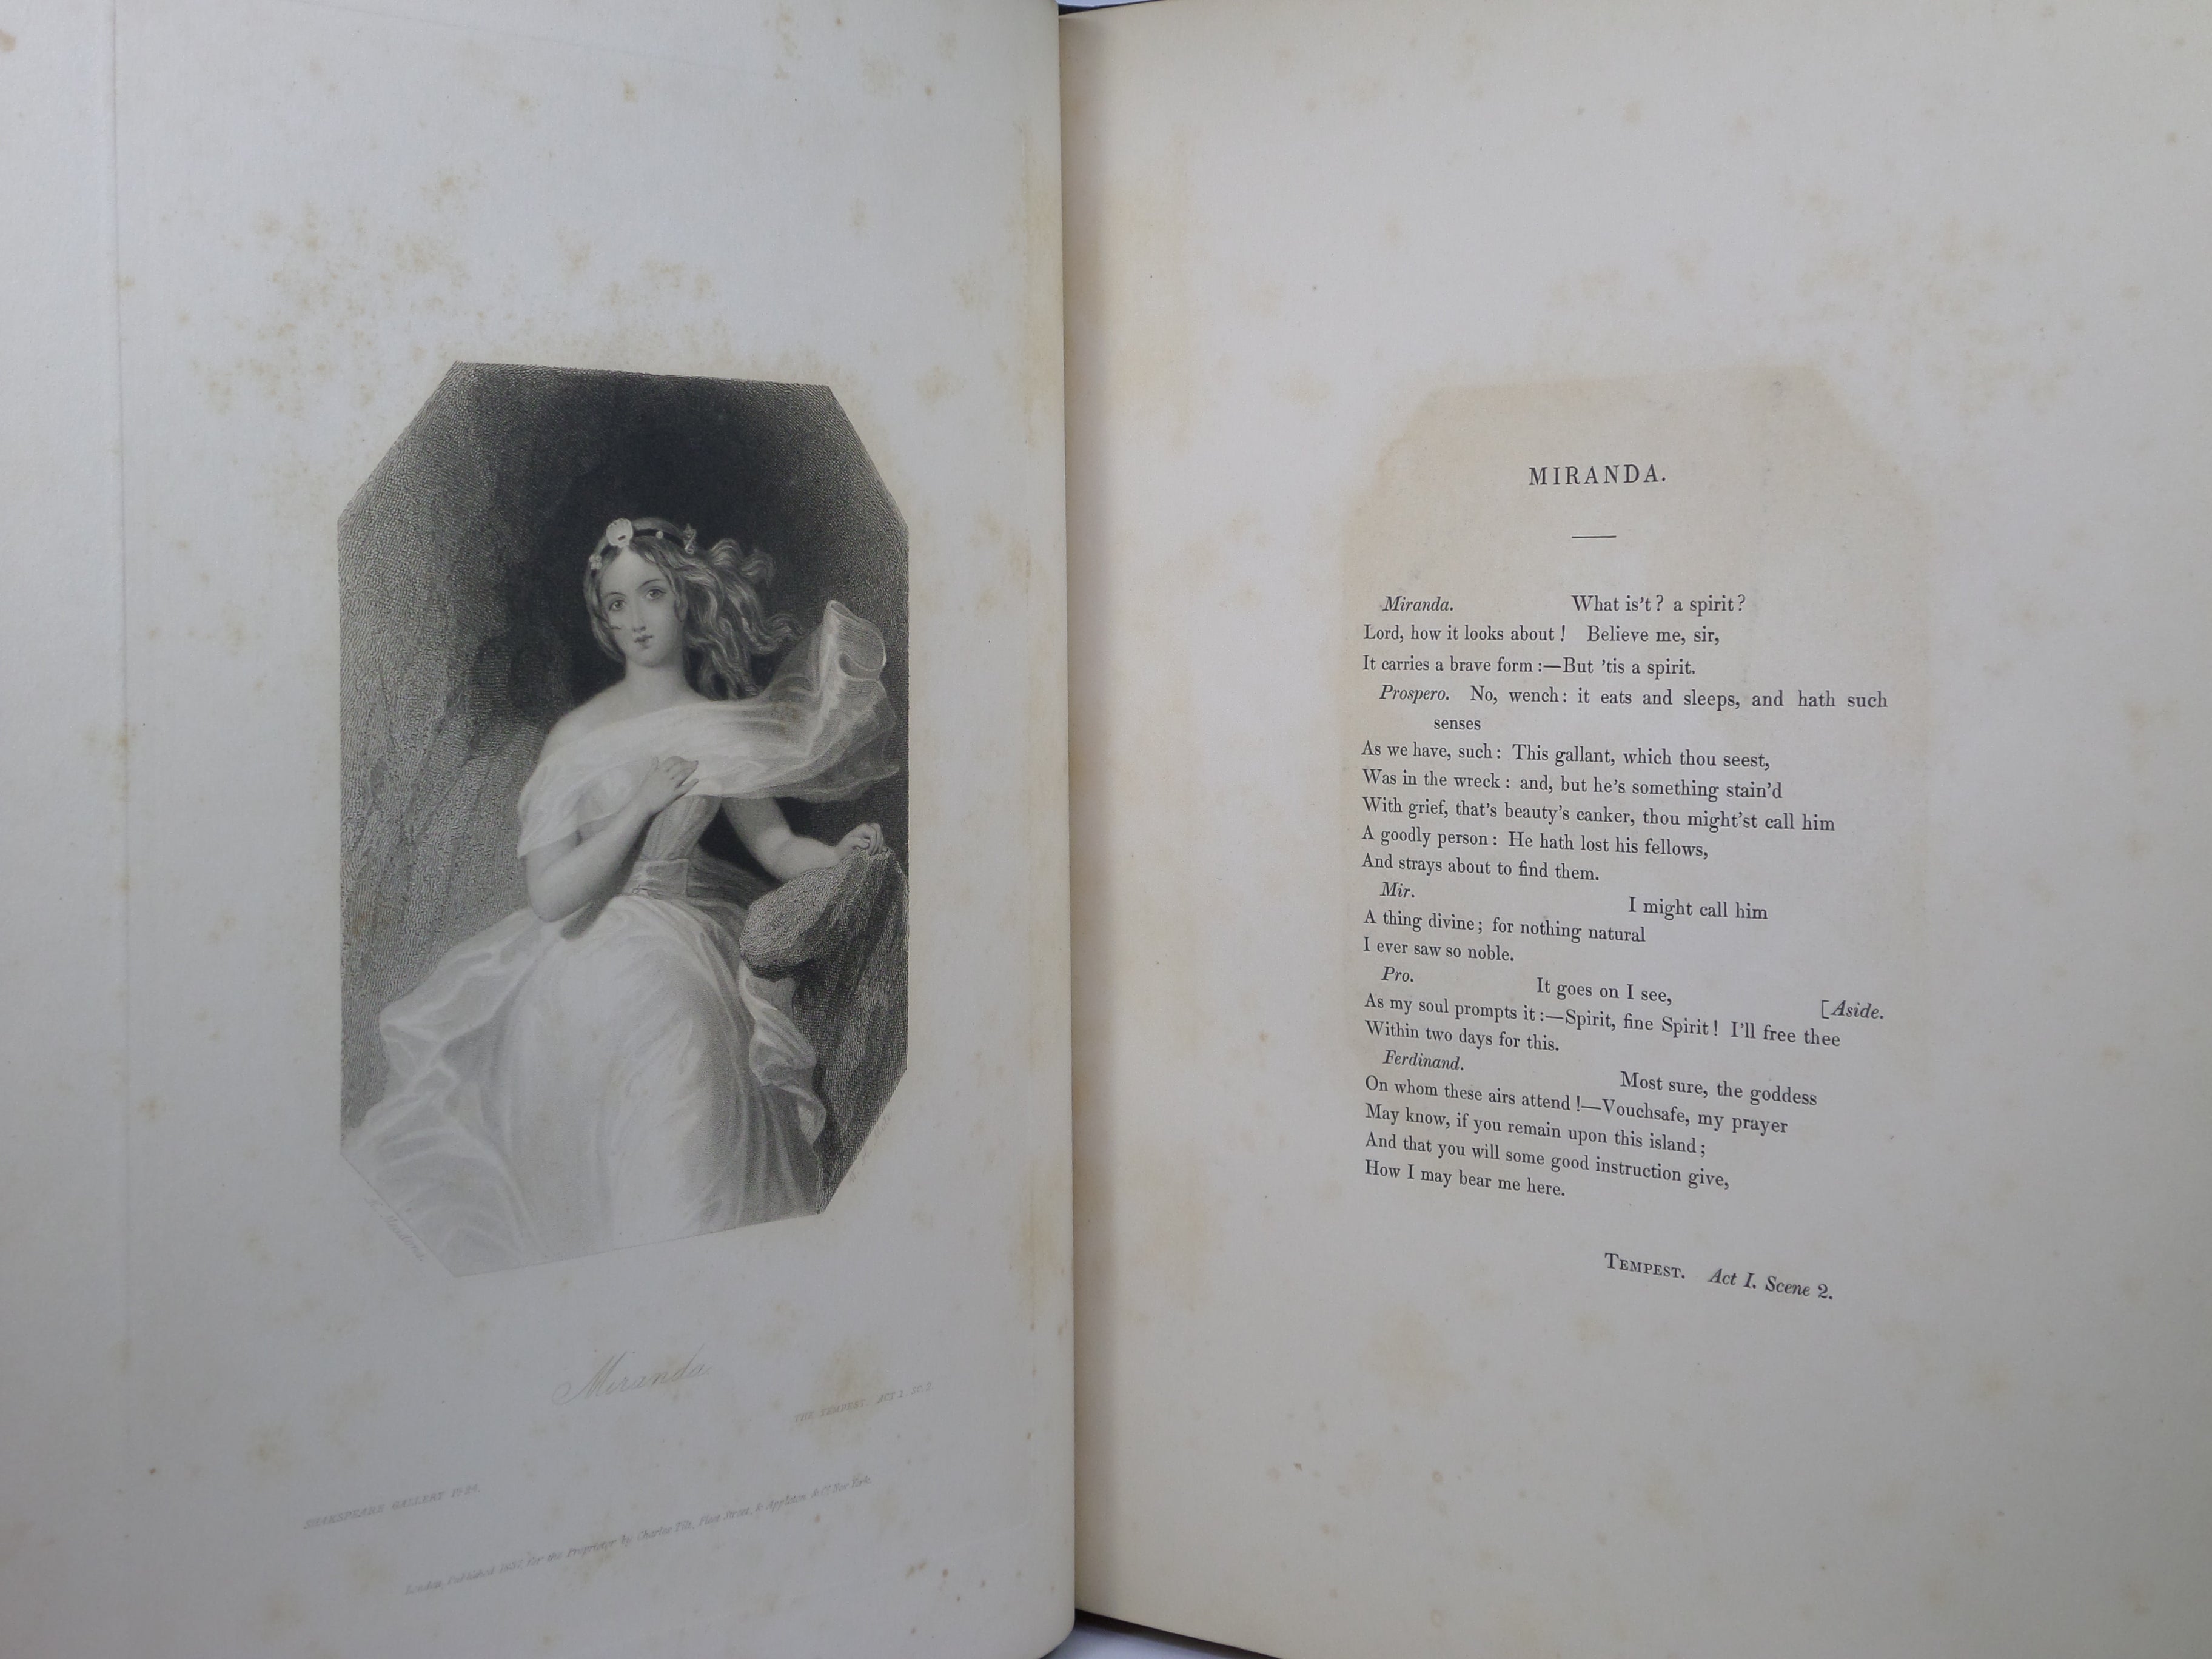 THE SHAKESPEARE GALLERY: CONTAINING THE PRINCIPLE FEMALE CHARACTERS BY CHARLES HEATH 1837 FINE LEATHER BINDING